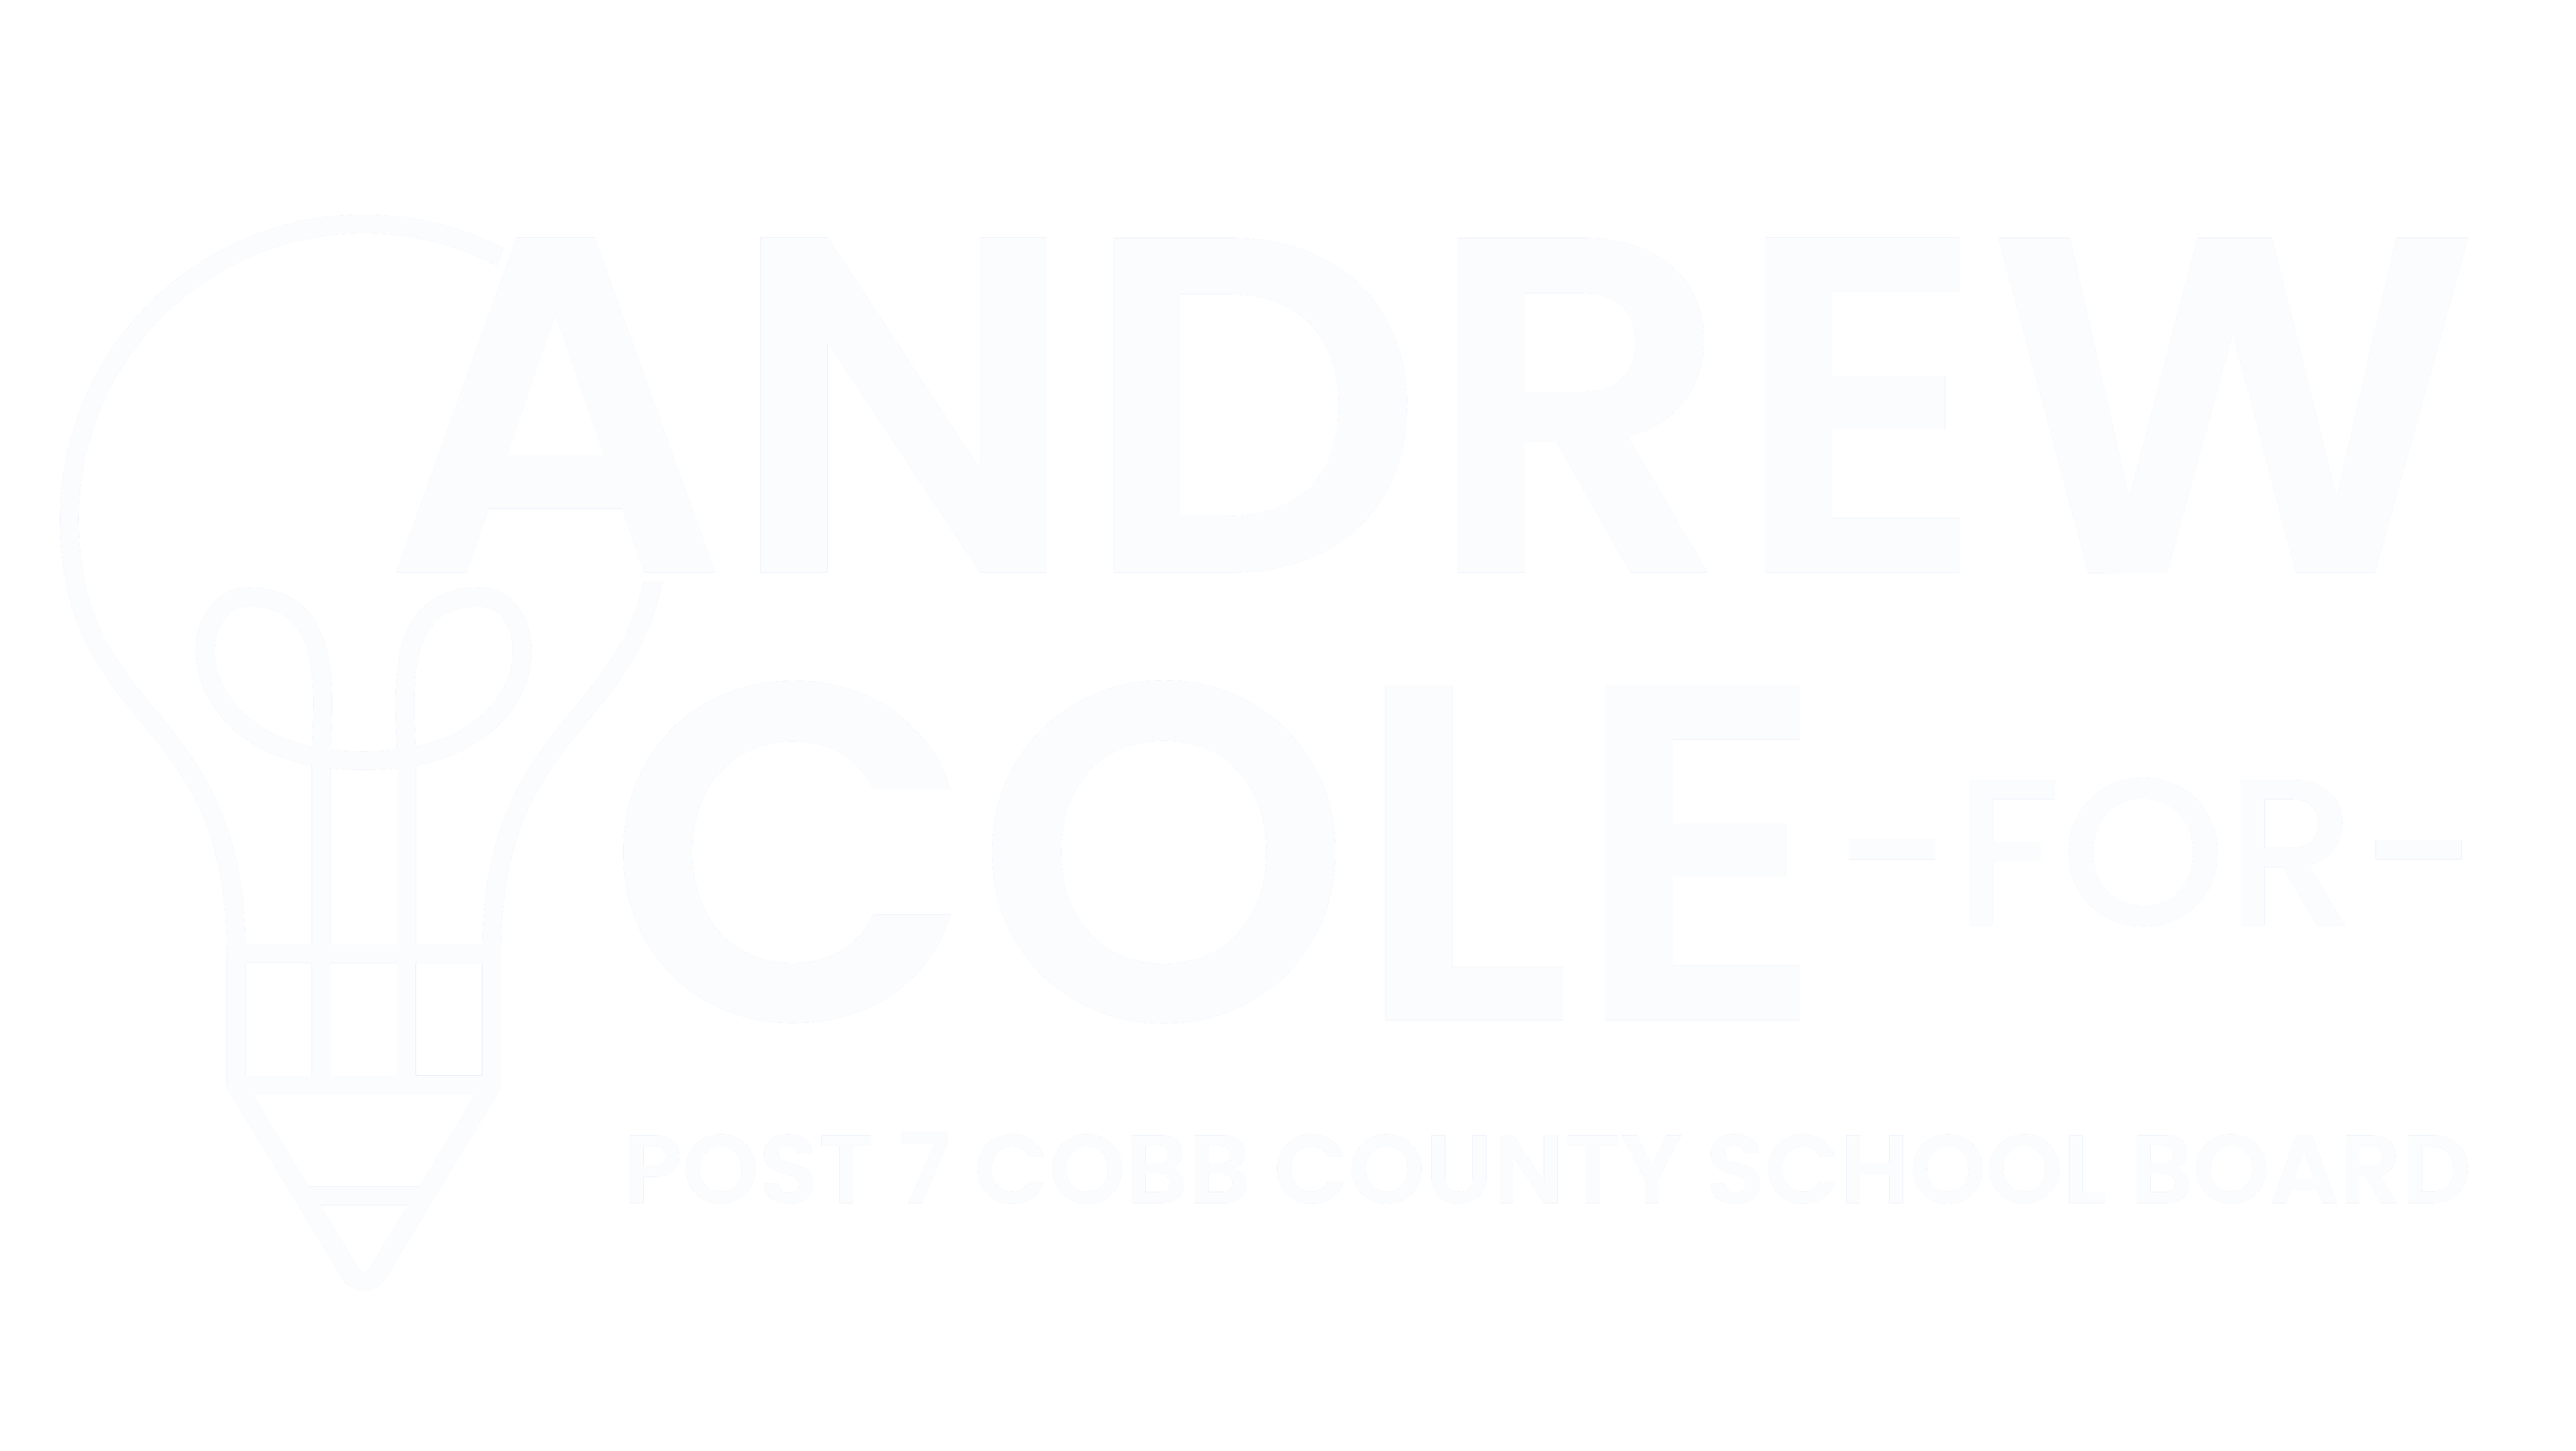 Andrew Cole for Cobb County School Board Post 7